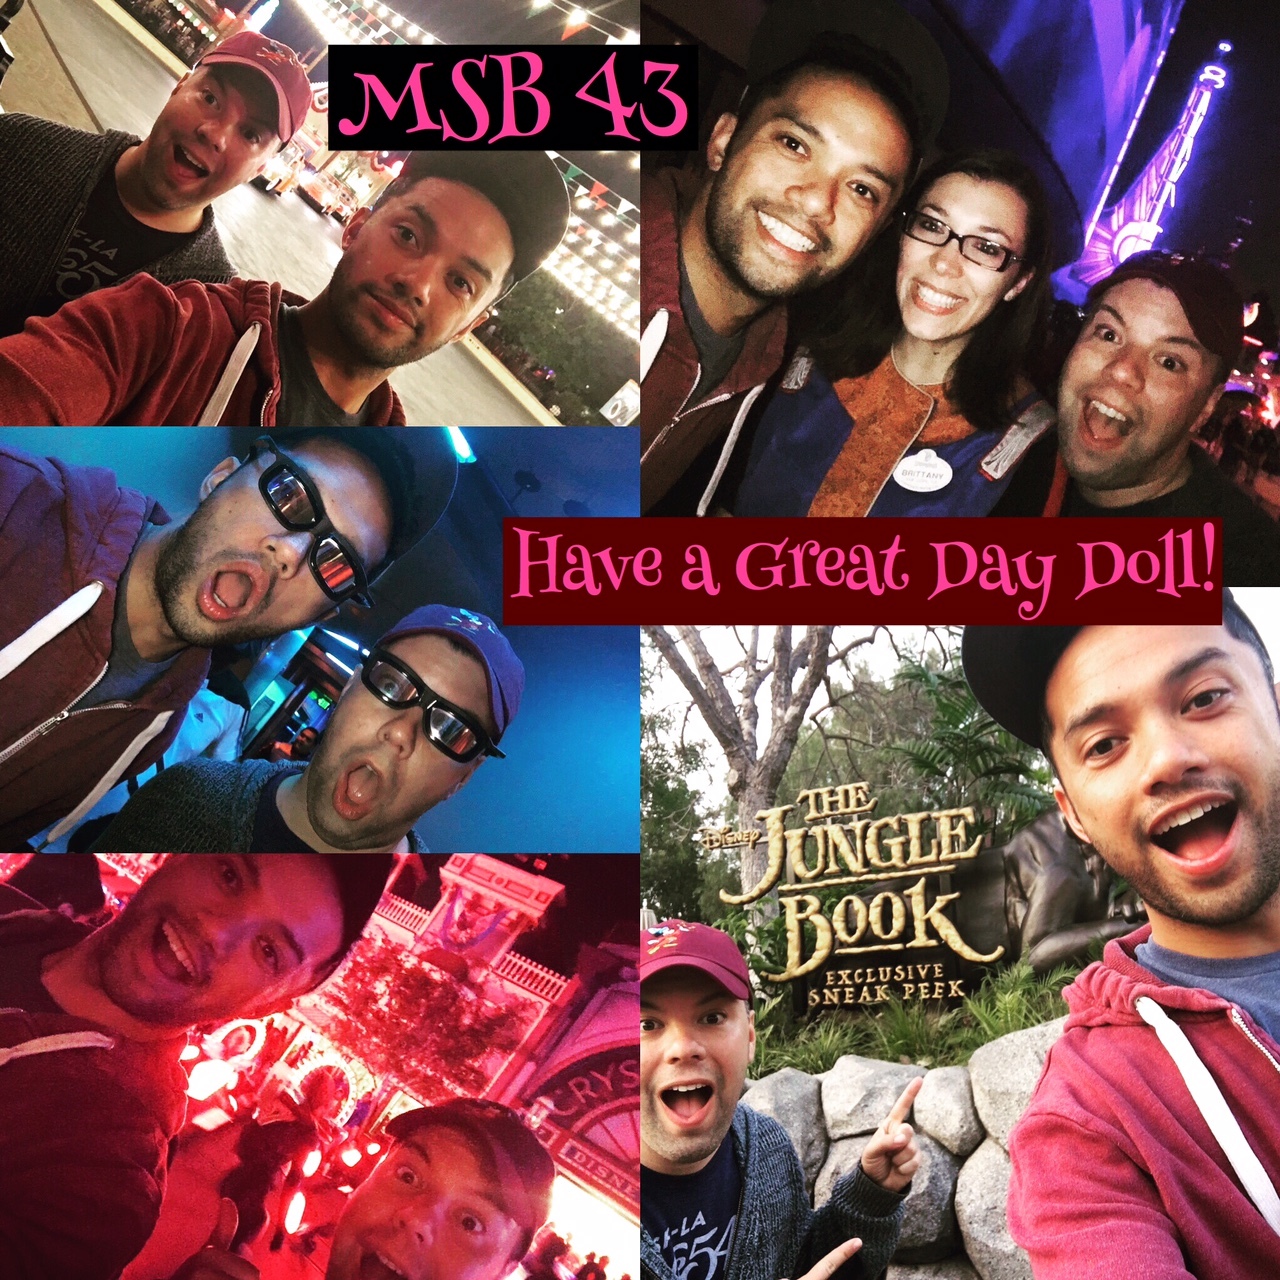 MSB Episode 43: Have A Great Day Doll!